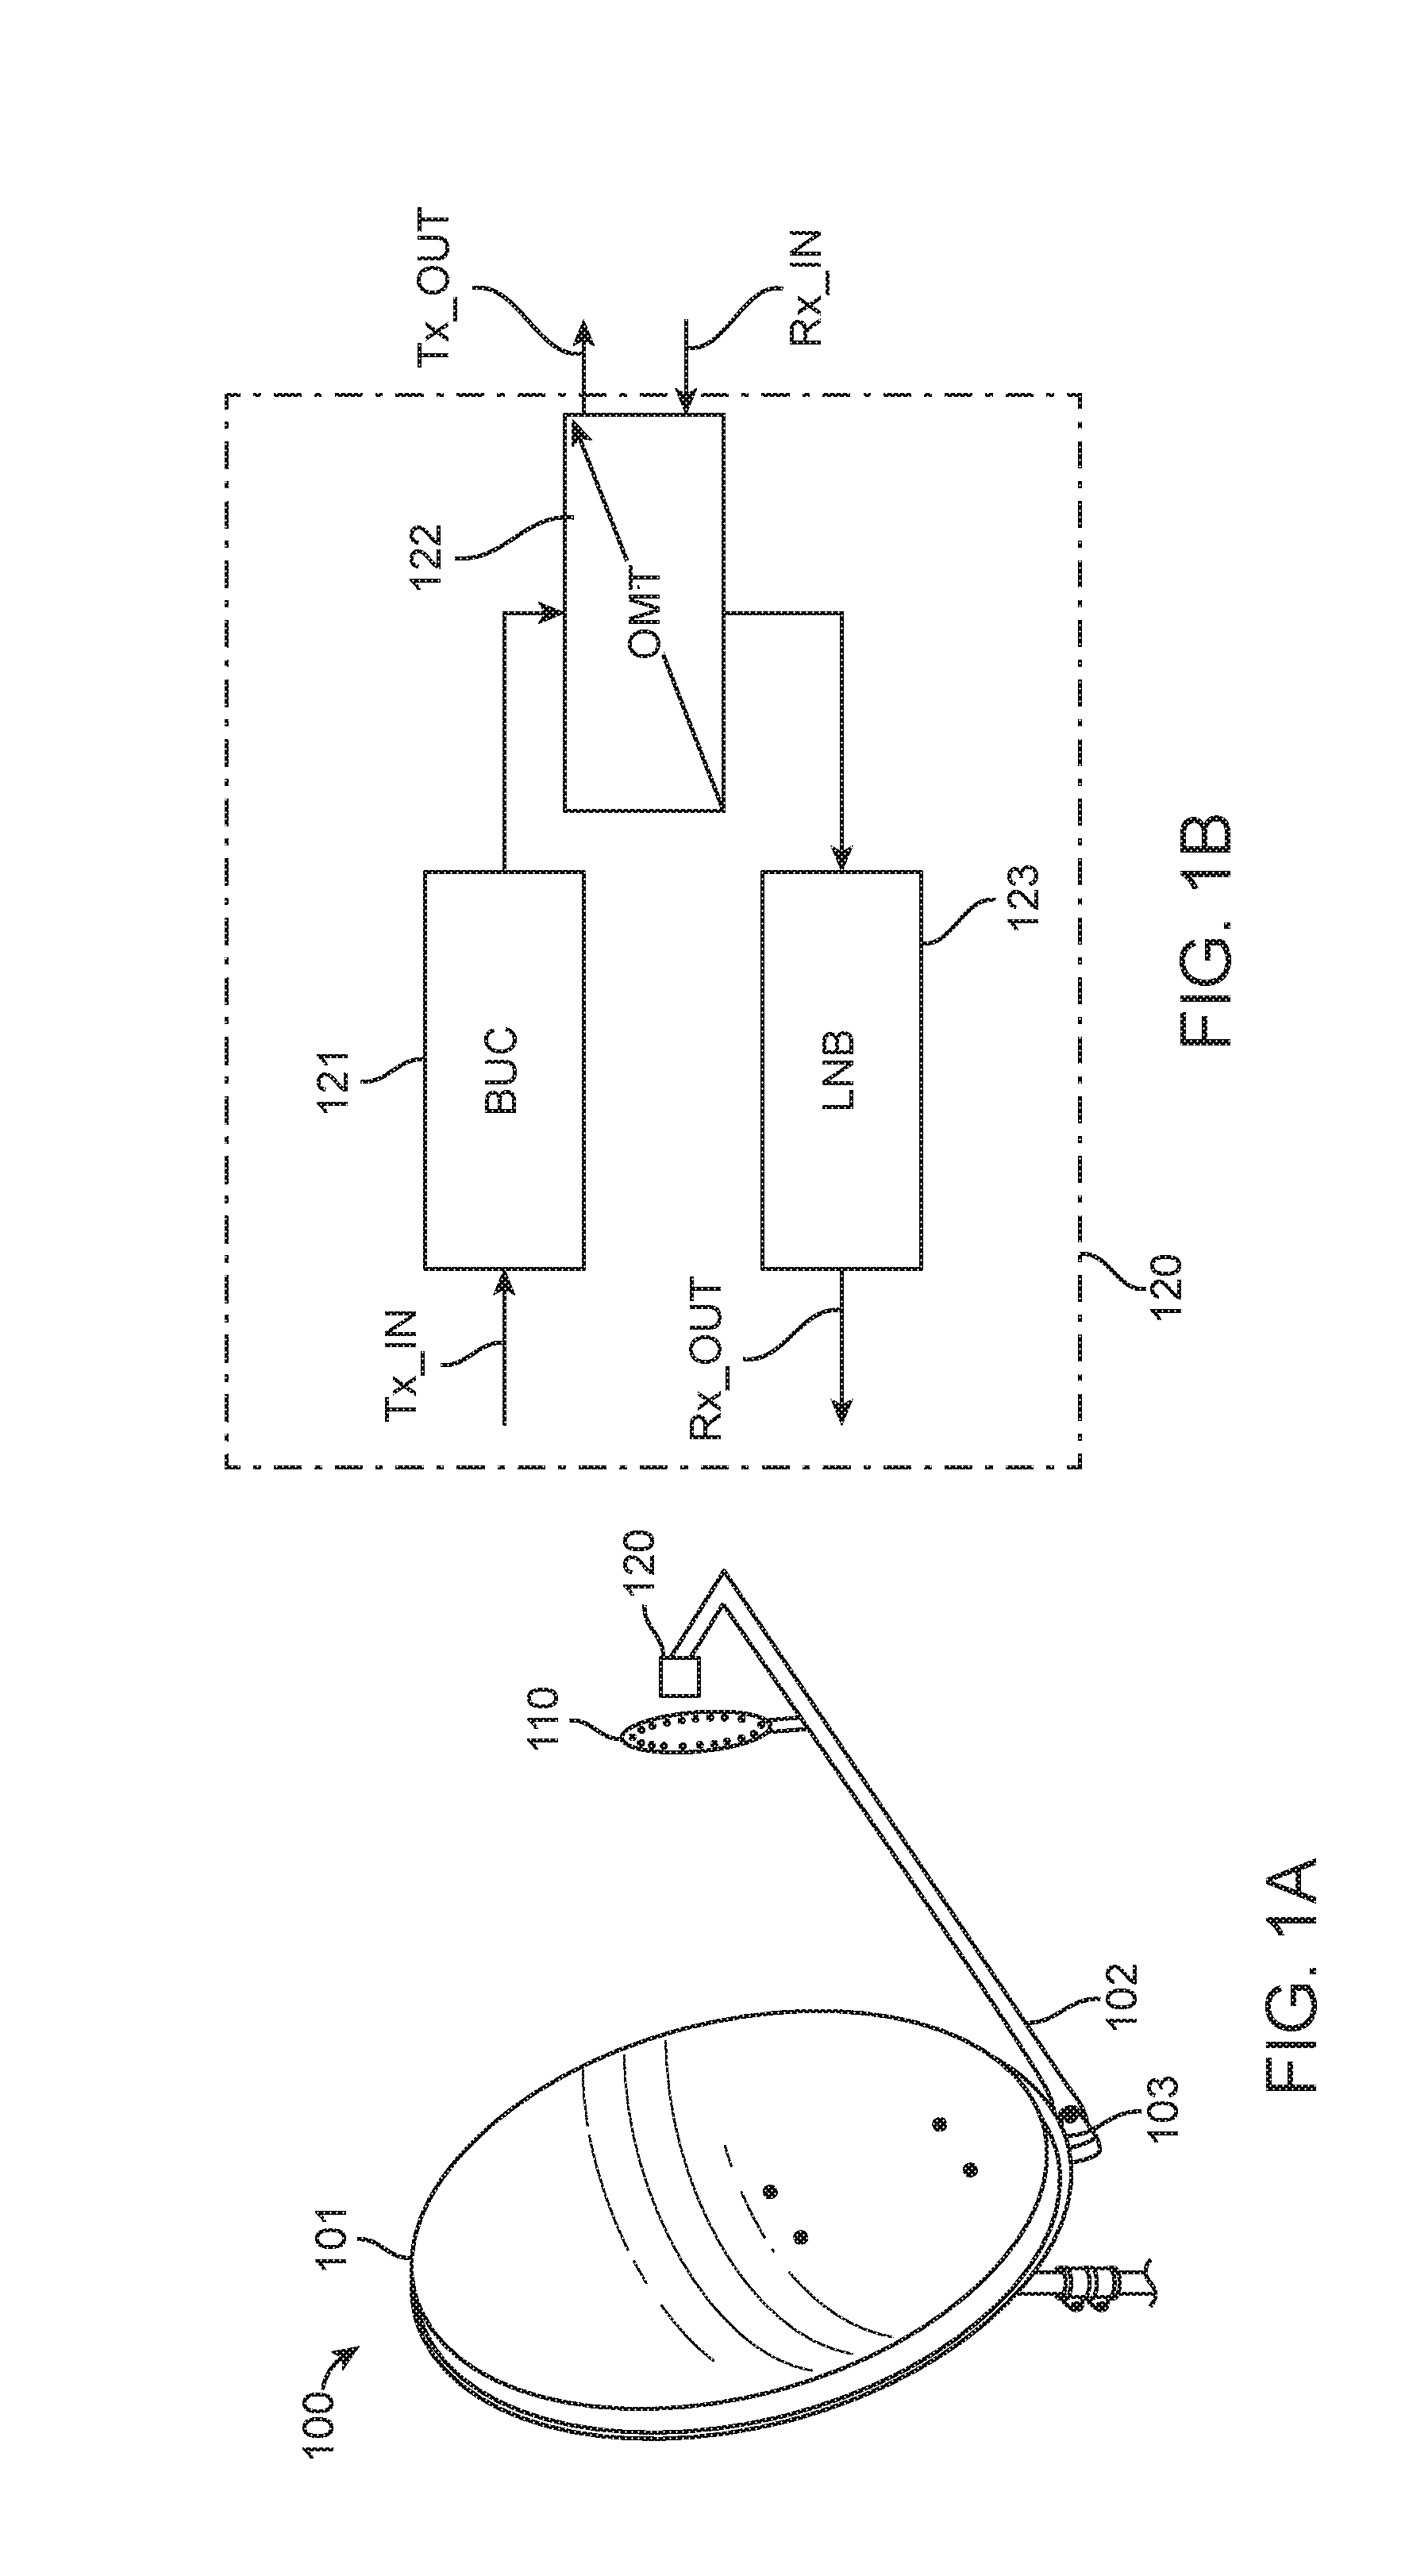 Systems and methods for transmission and reception of radio waves in a focal plane antenna array